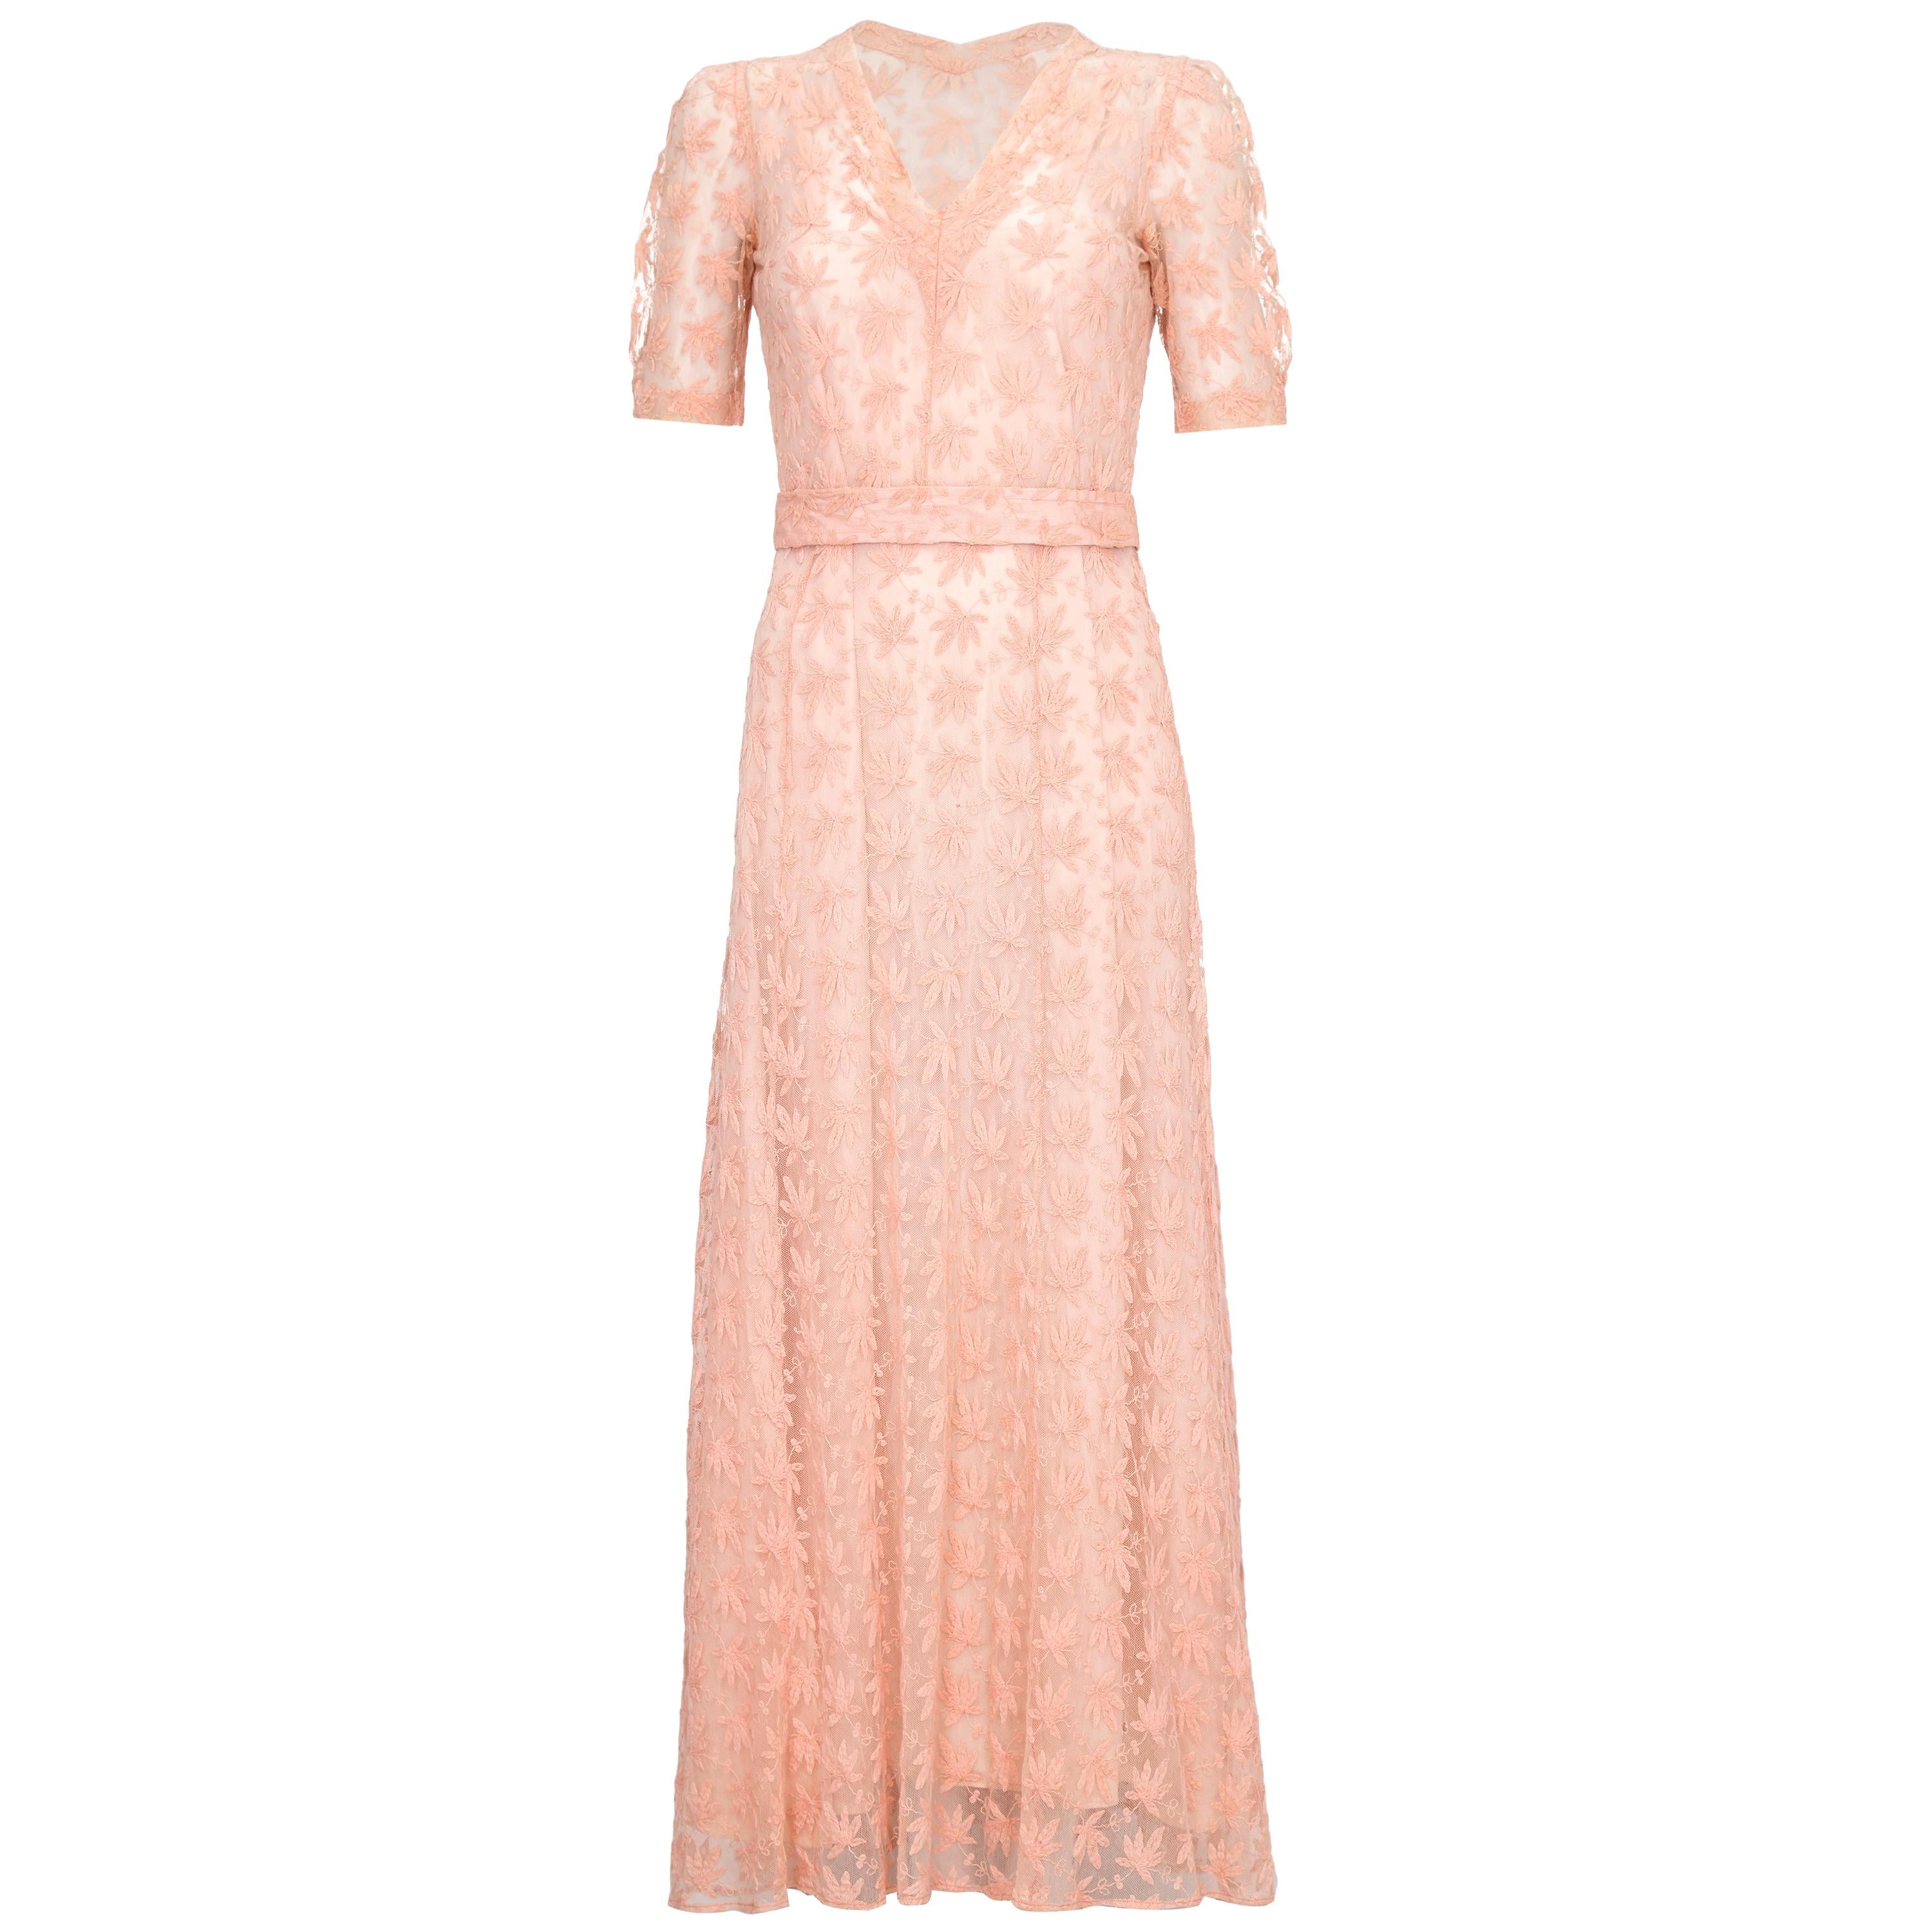 1930s Pale Pink Embroidered Lace Tea Gown Dress For Sale